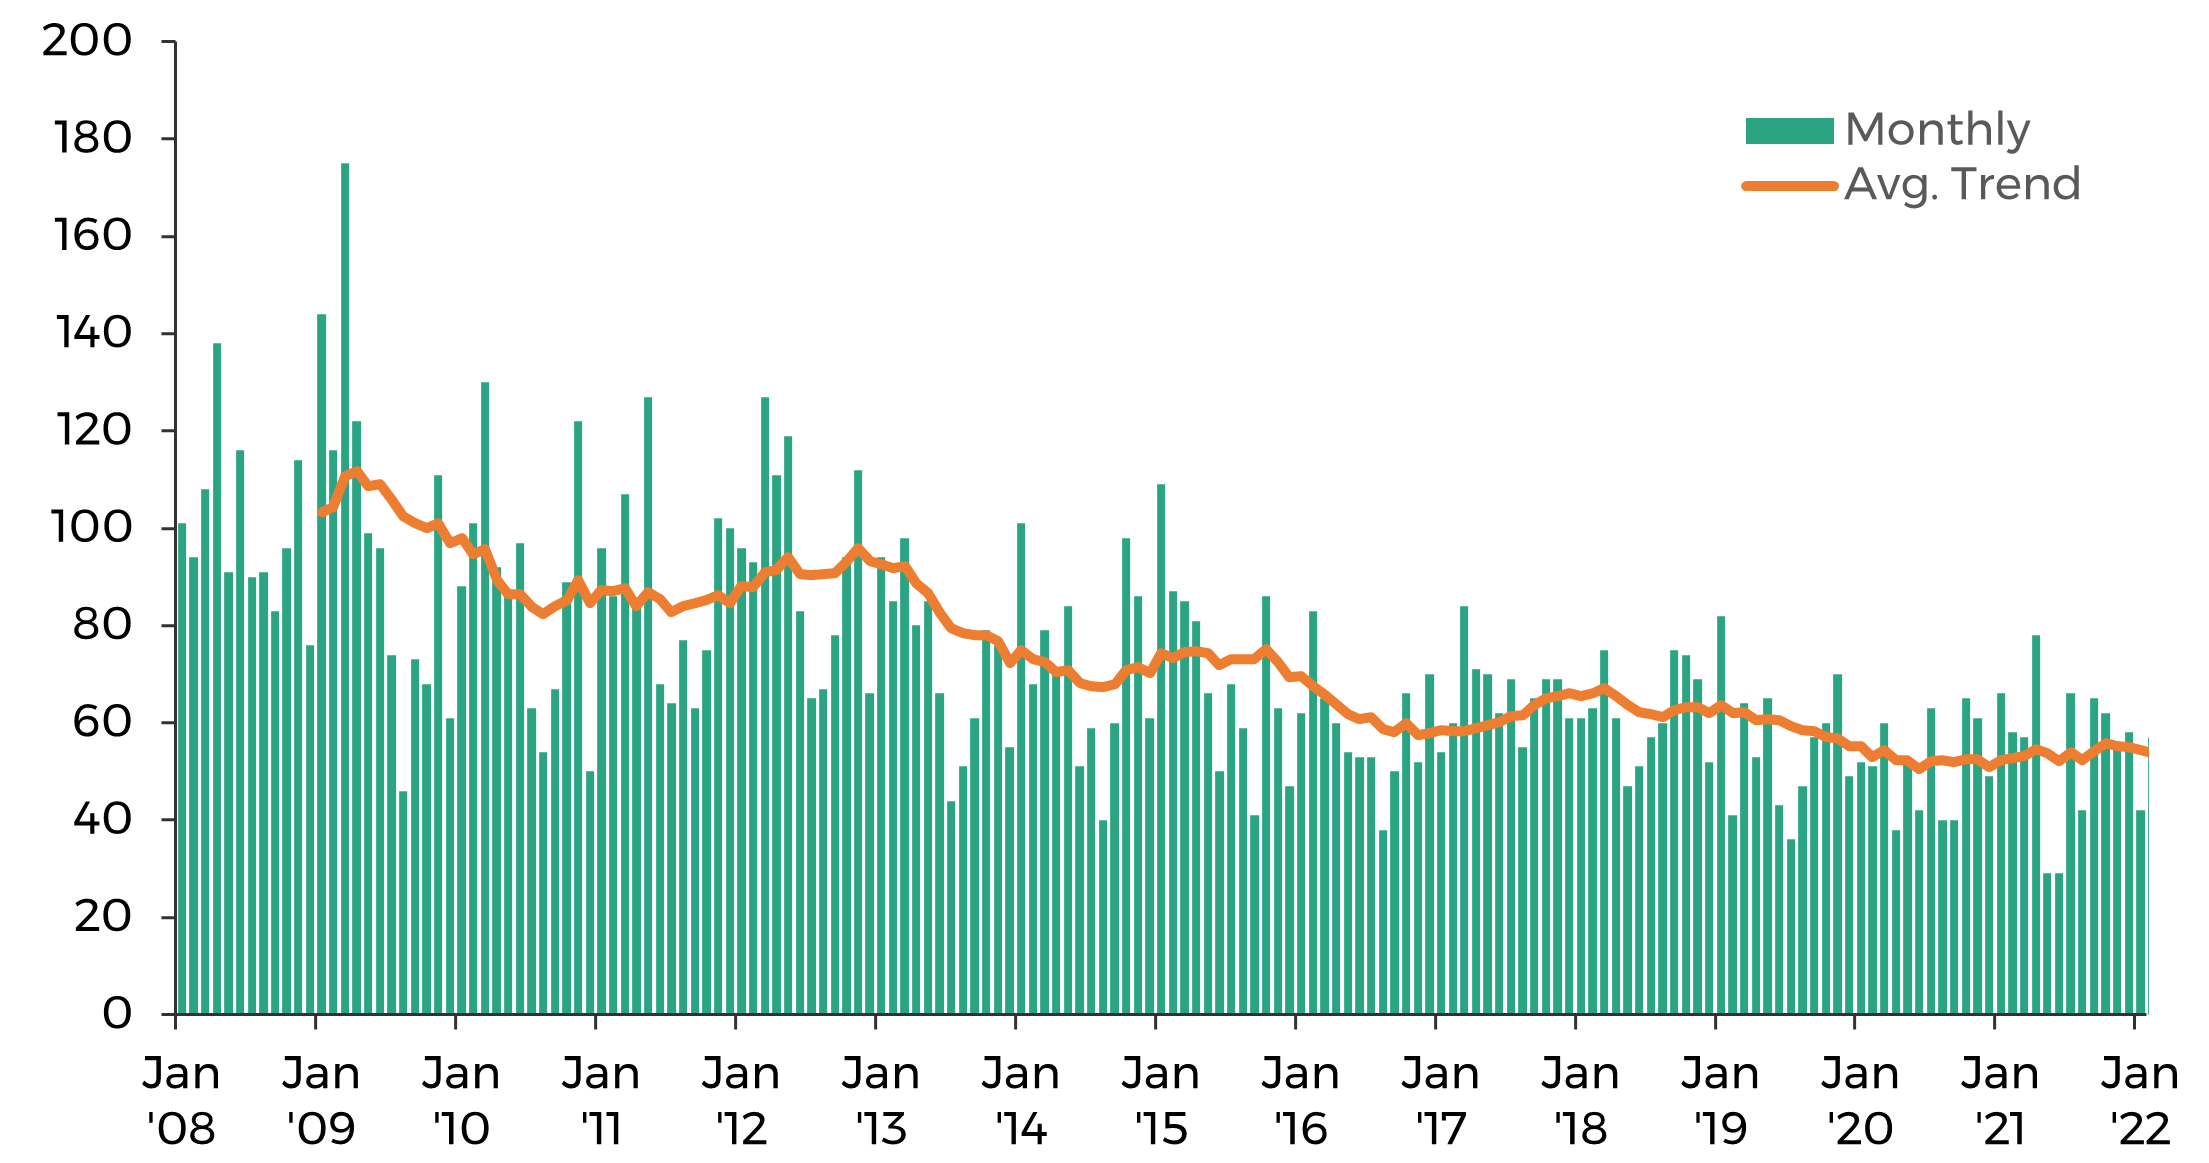 Graph 1 shows the number of new herd incidents of bovine TB from January 2008 to January 2022. The number of new herd incidents has decreased steadily since January 2008.